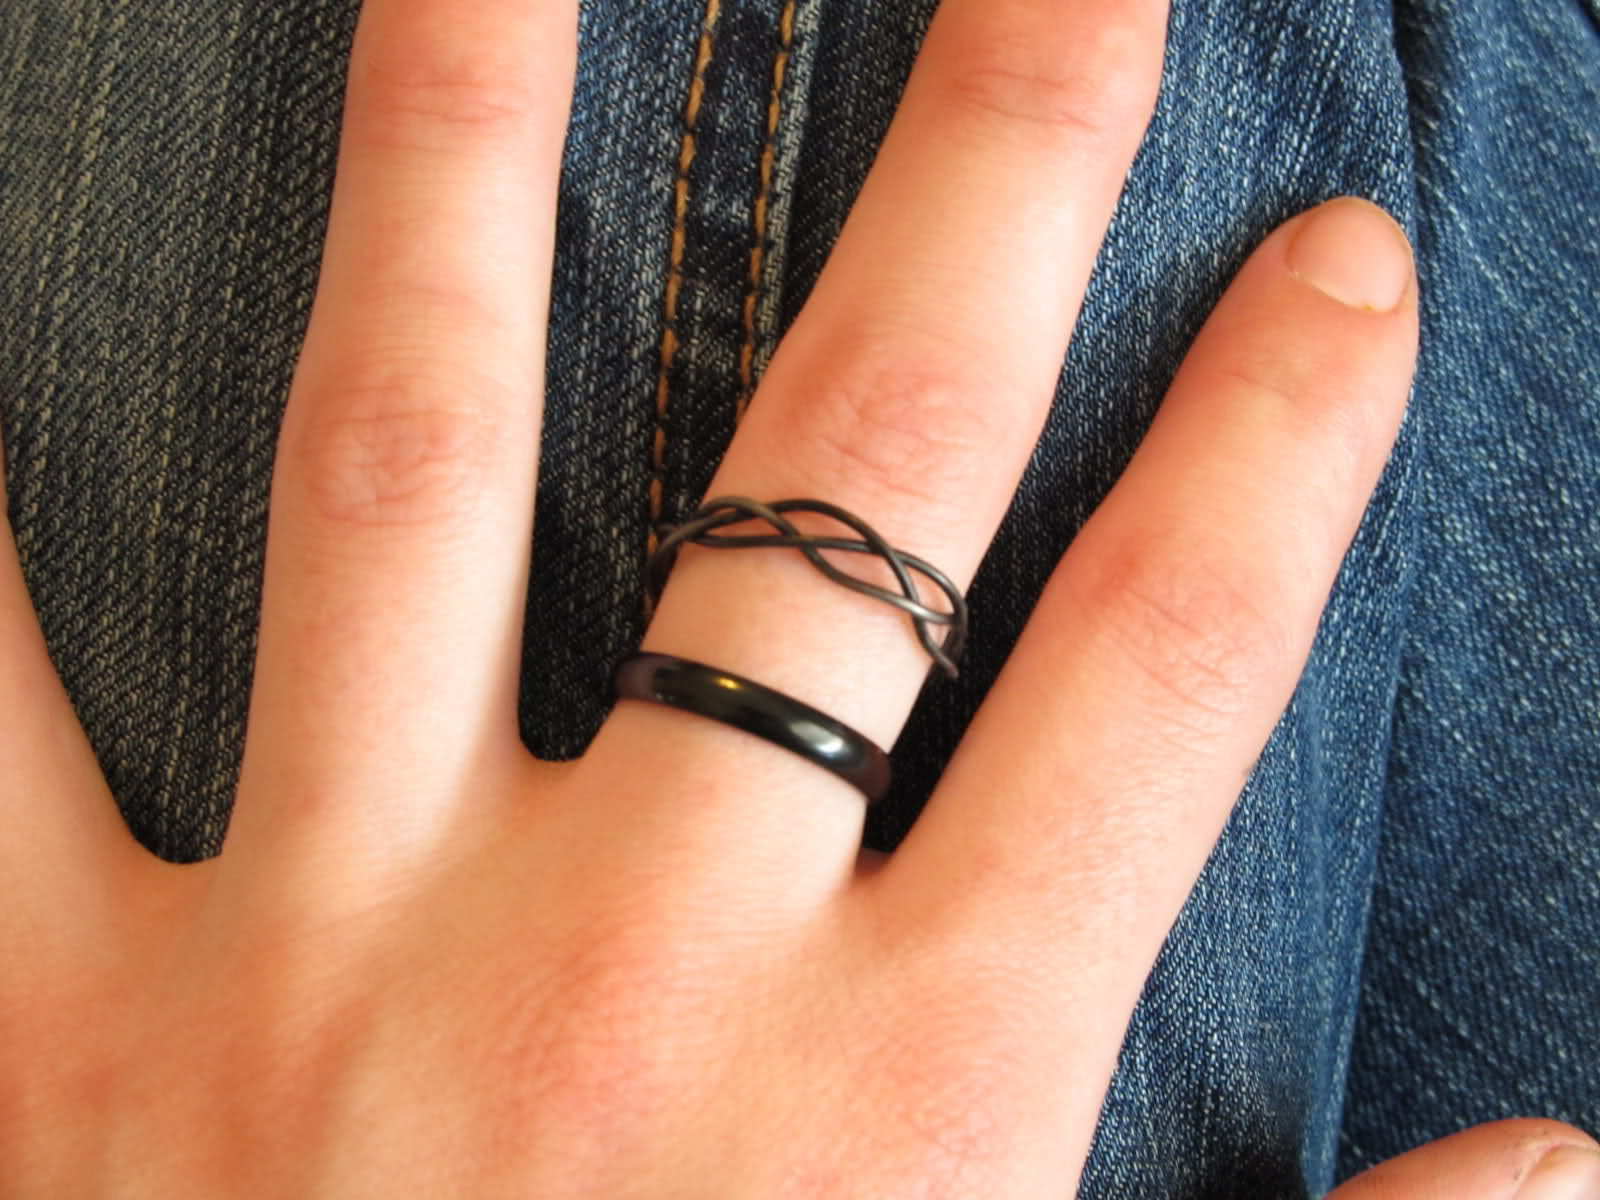 Do you wear an asexuality ring? (A black ring on the middle finger of